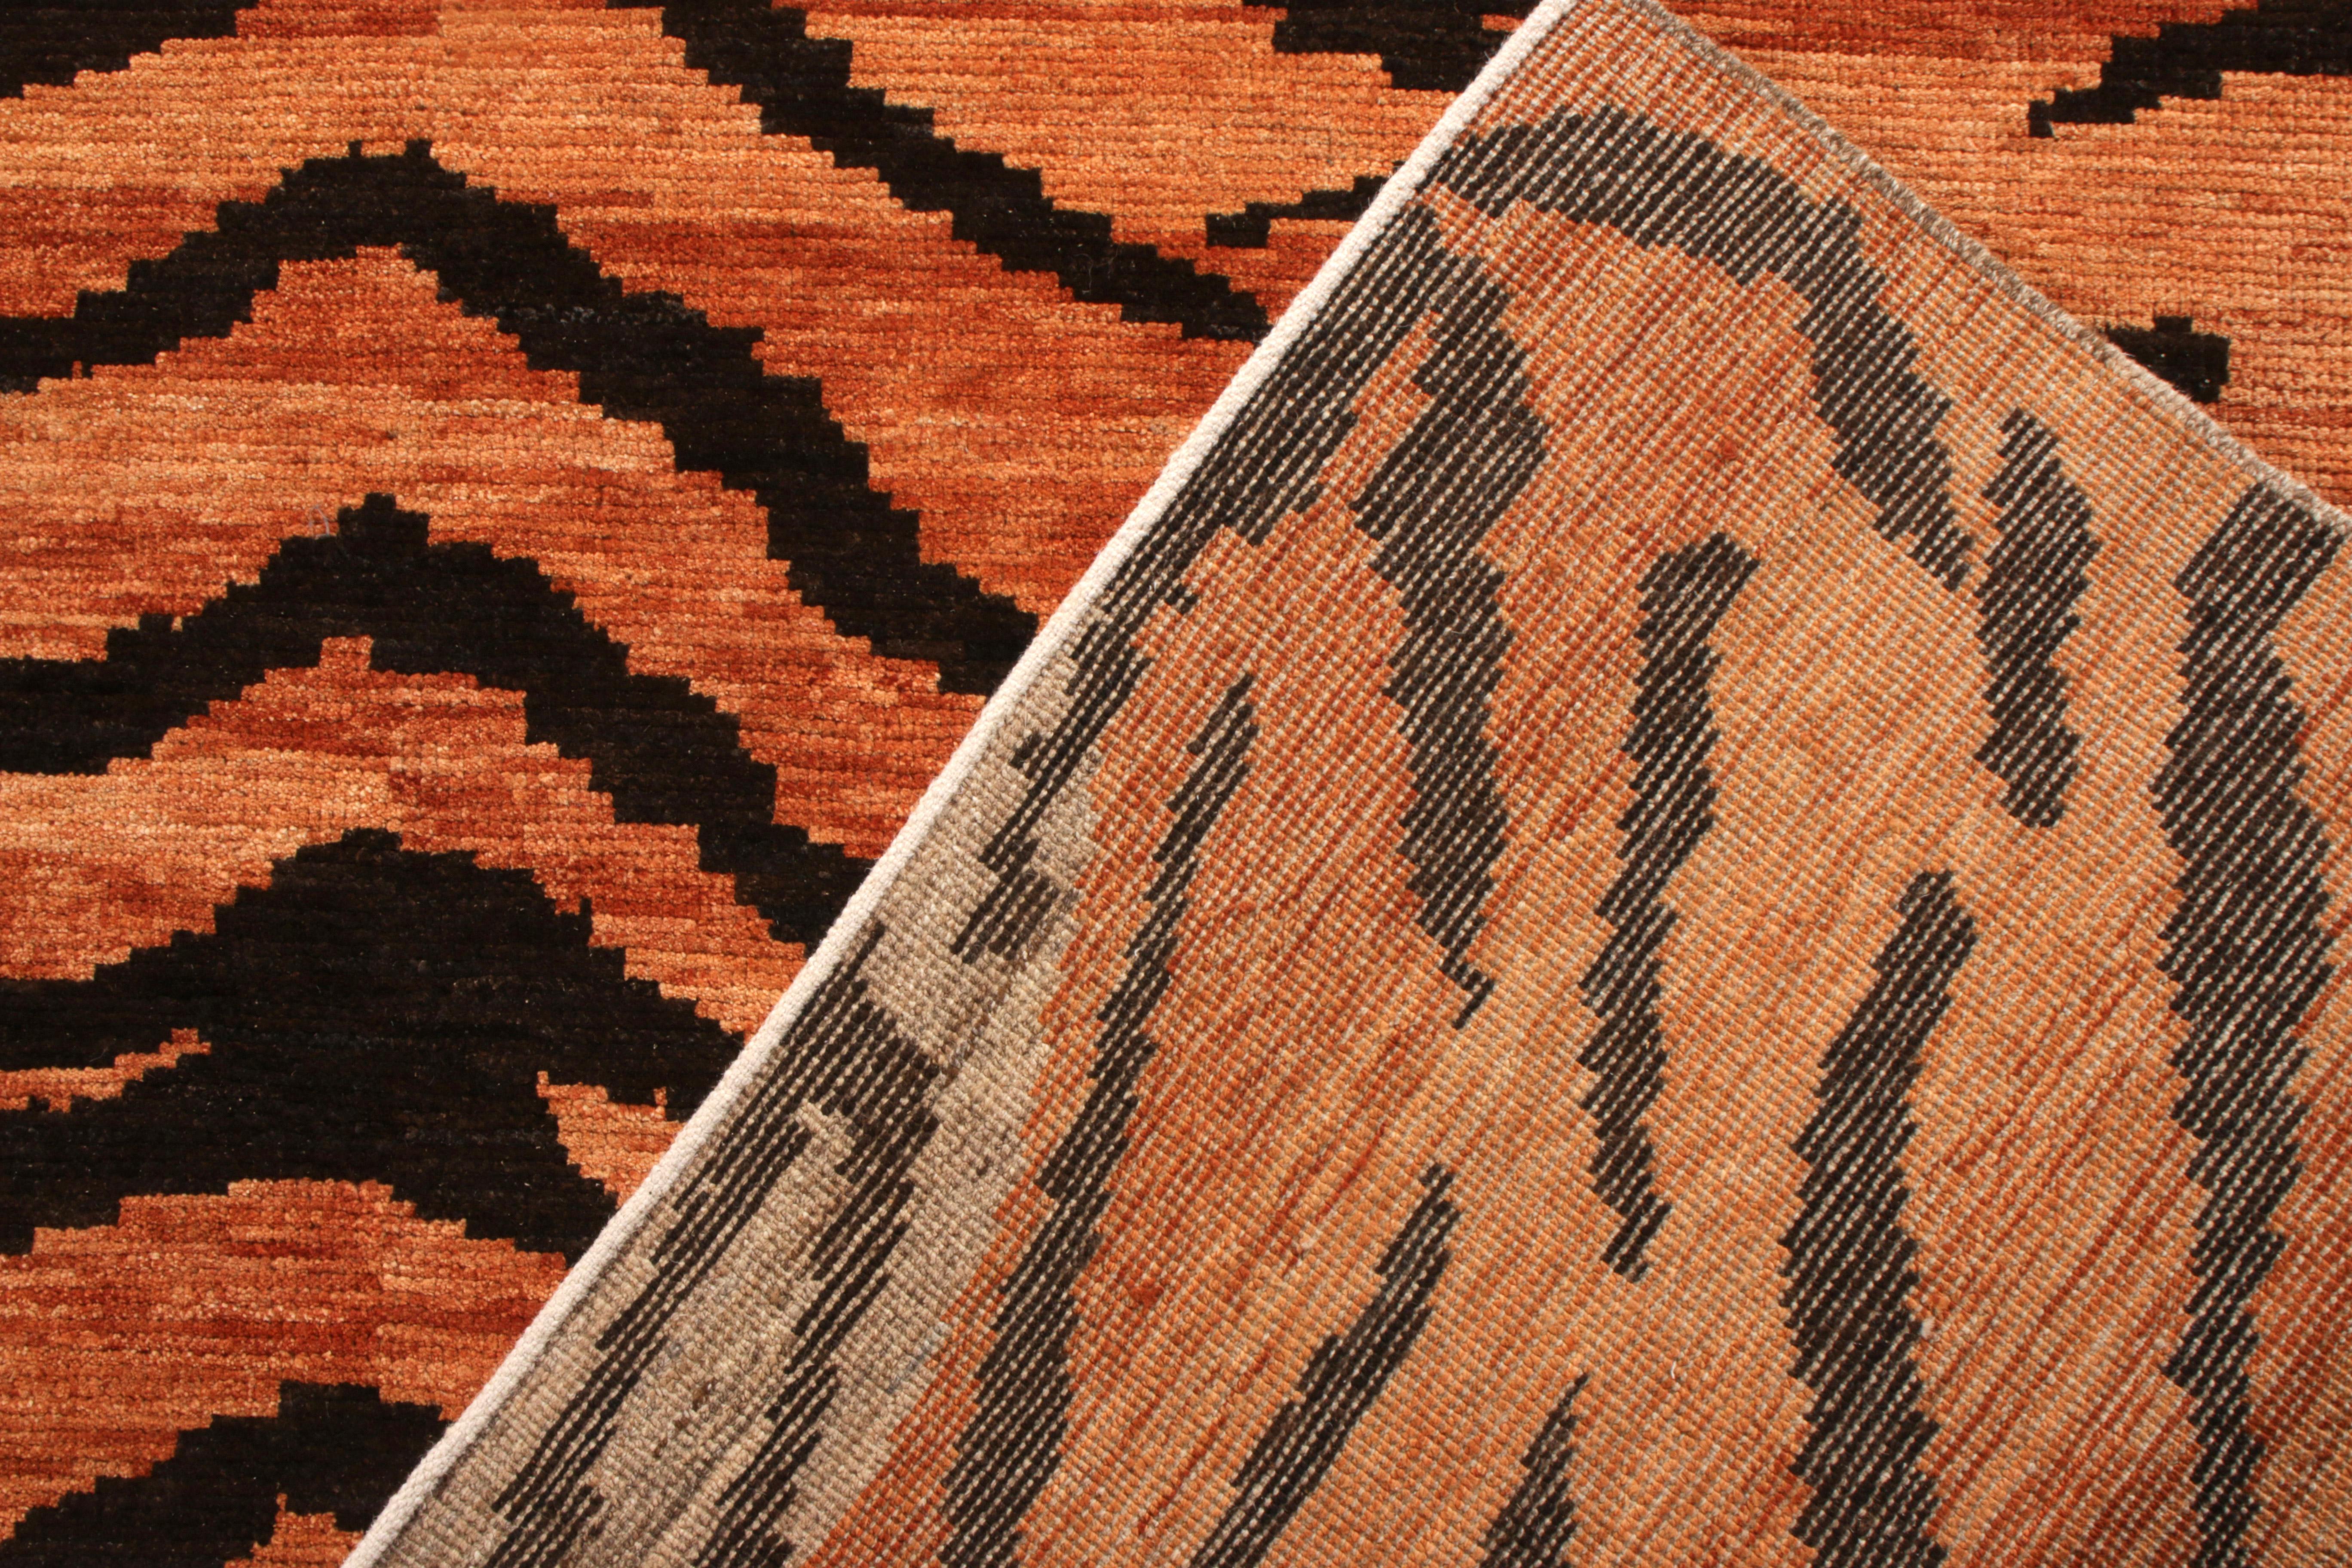 Rug & Kilim’s Tiger Rug in Orange, Beige-Brown and Black Pelt Pattern In New Condition For Sale In Long Island City, NY